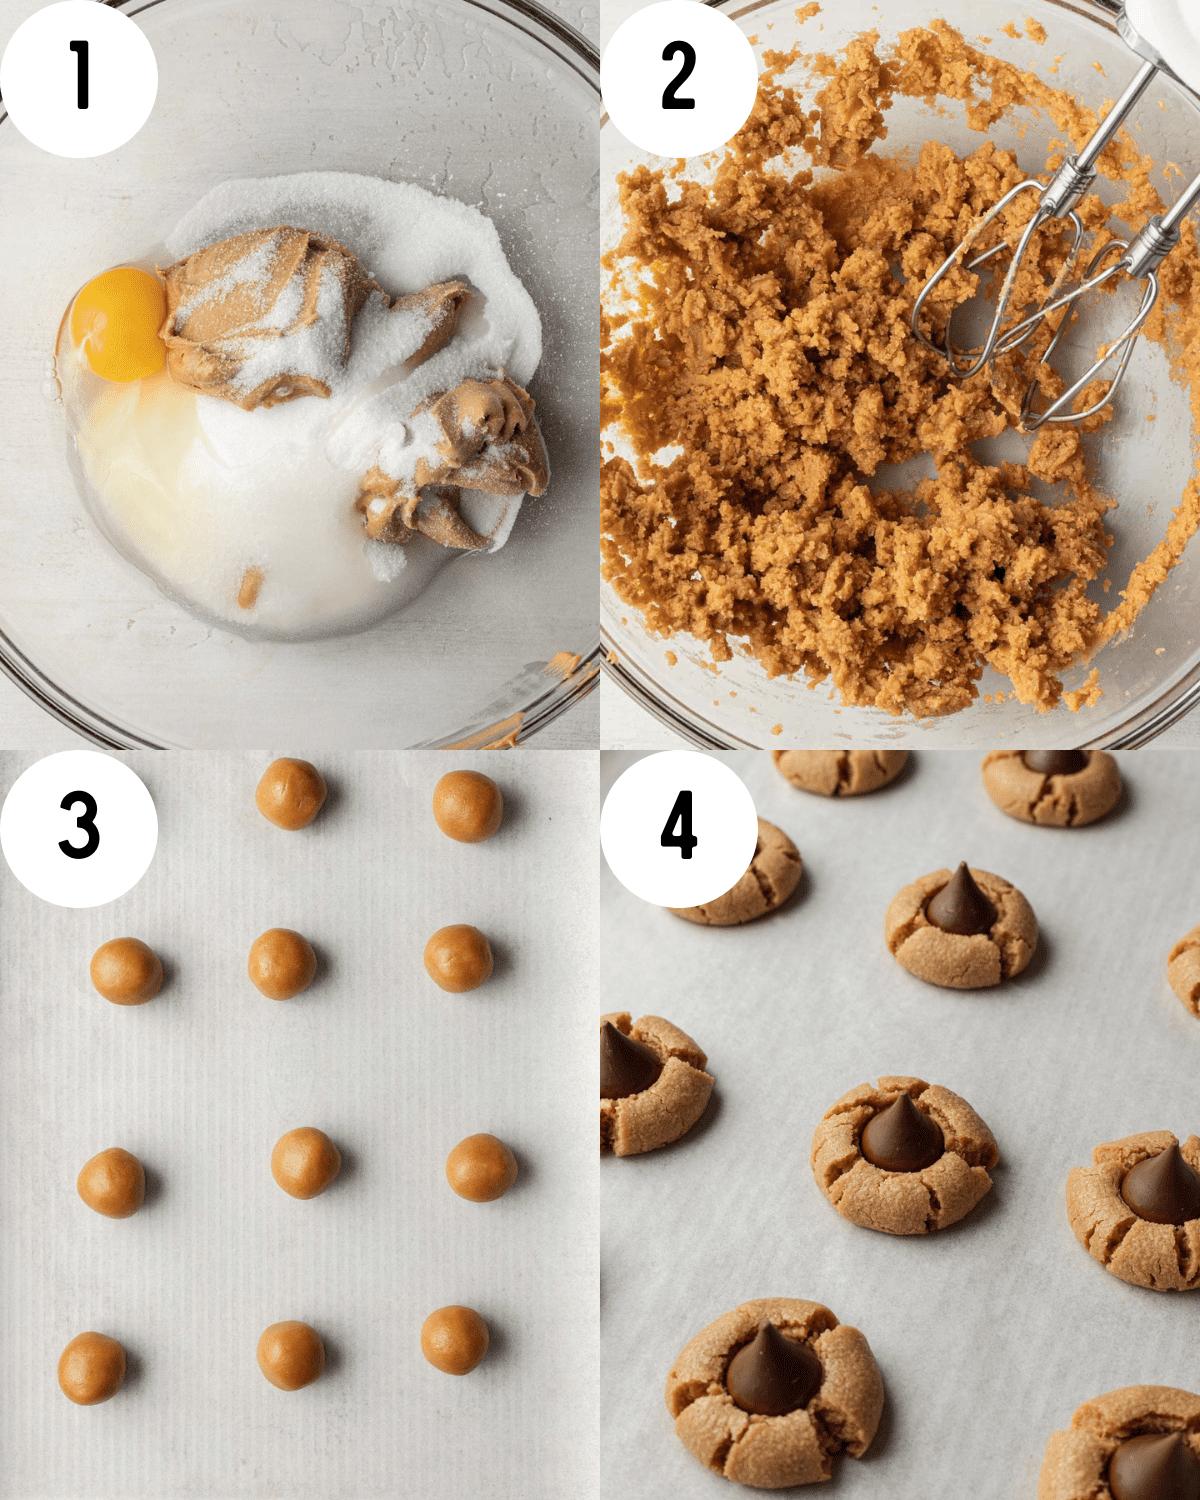 How to make three-ingredient peanut butter blossoms. 1. Three ingredients combined in glass bowl. 2. Mixed ingredients in glass bowl with mixer. 3. rolled dough in small ball form placed on sheet. 4. Hershey kisses added on top of each individual dough ball.